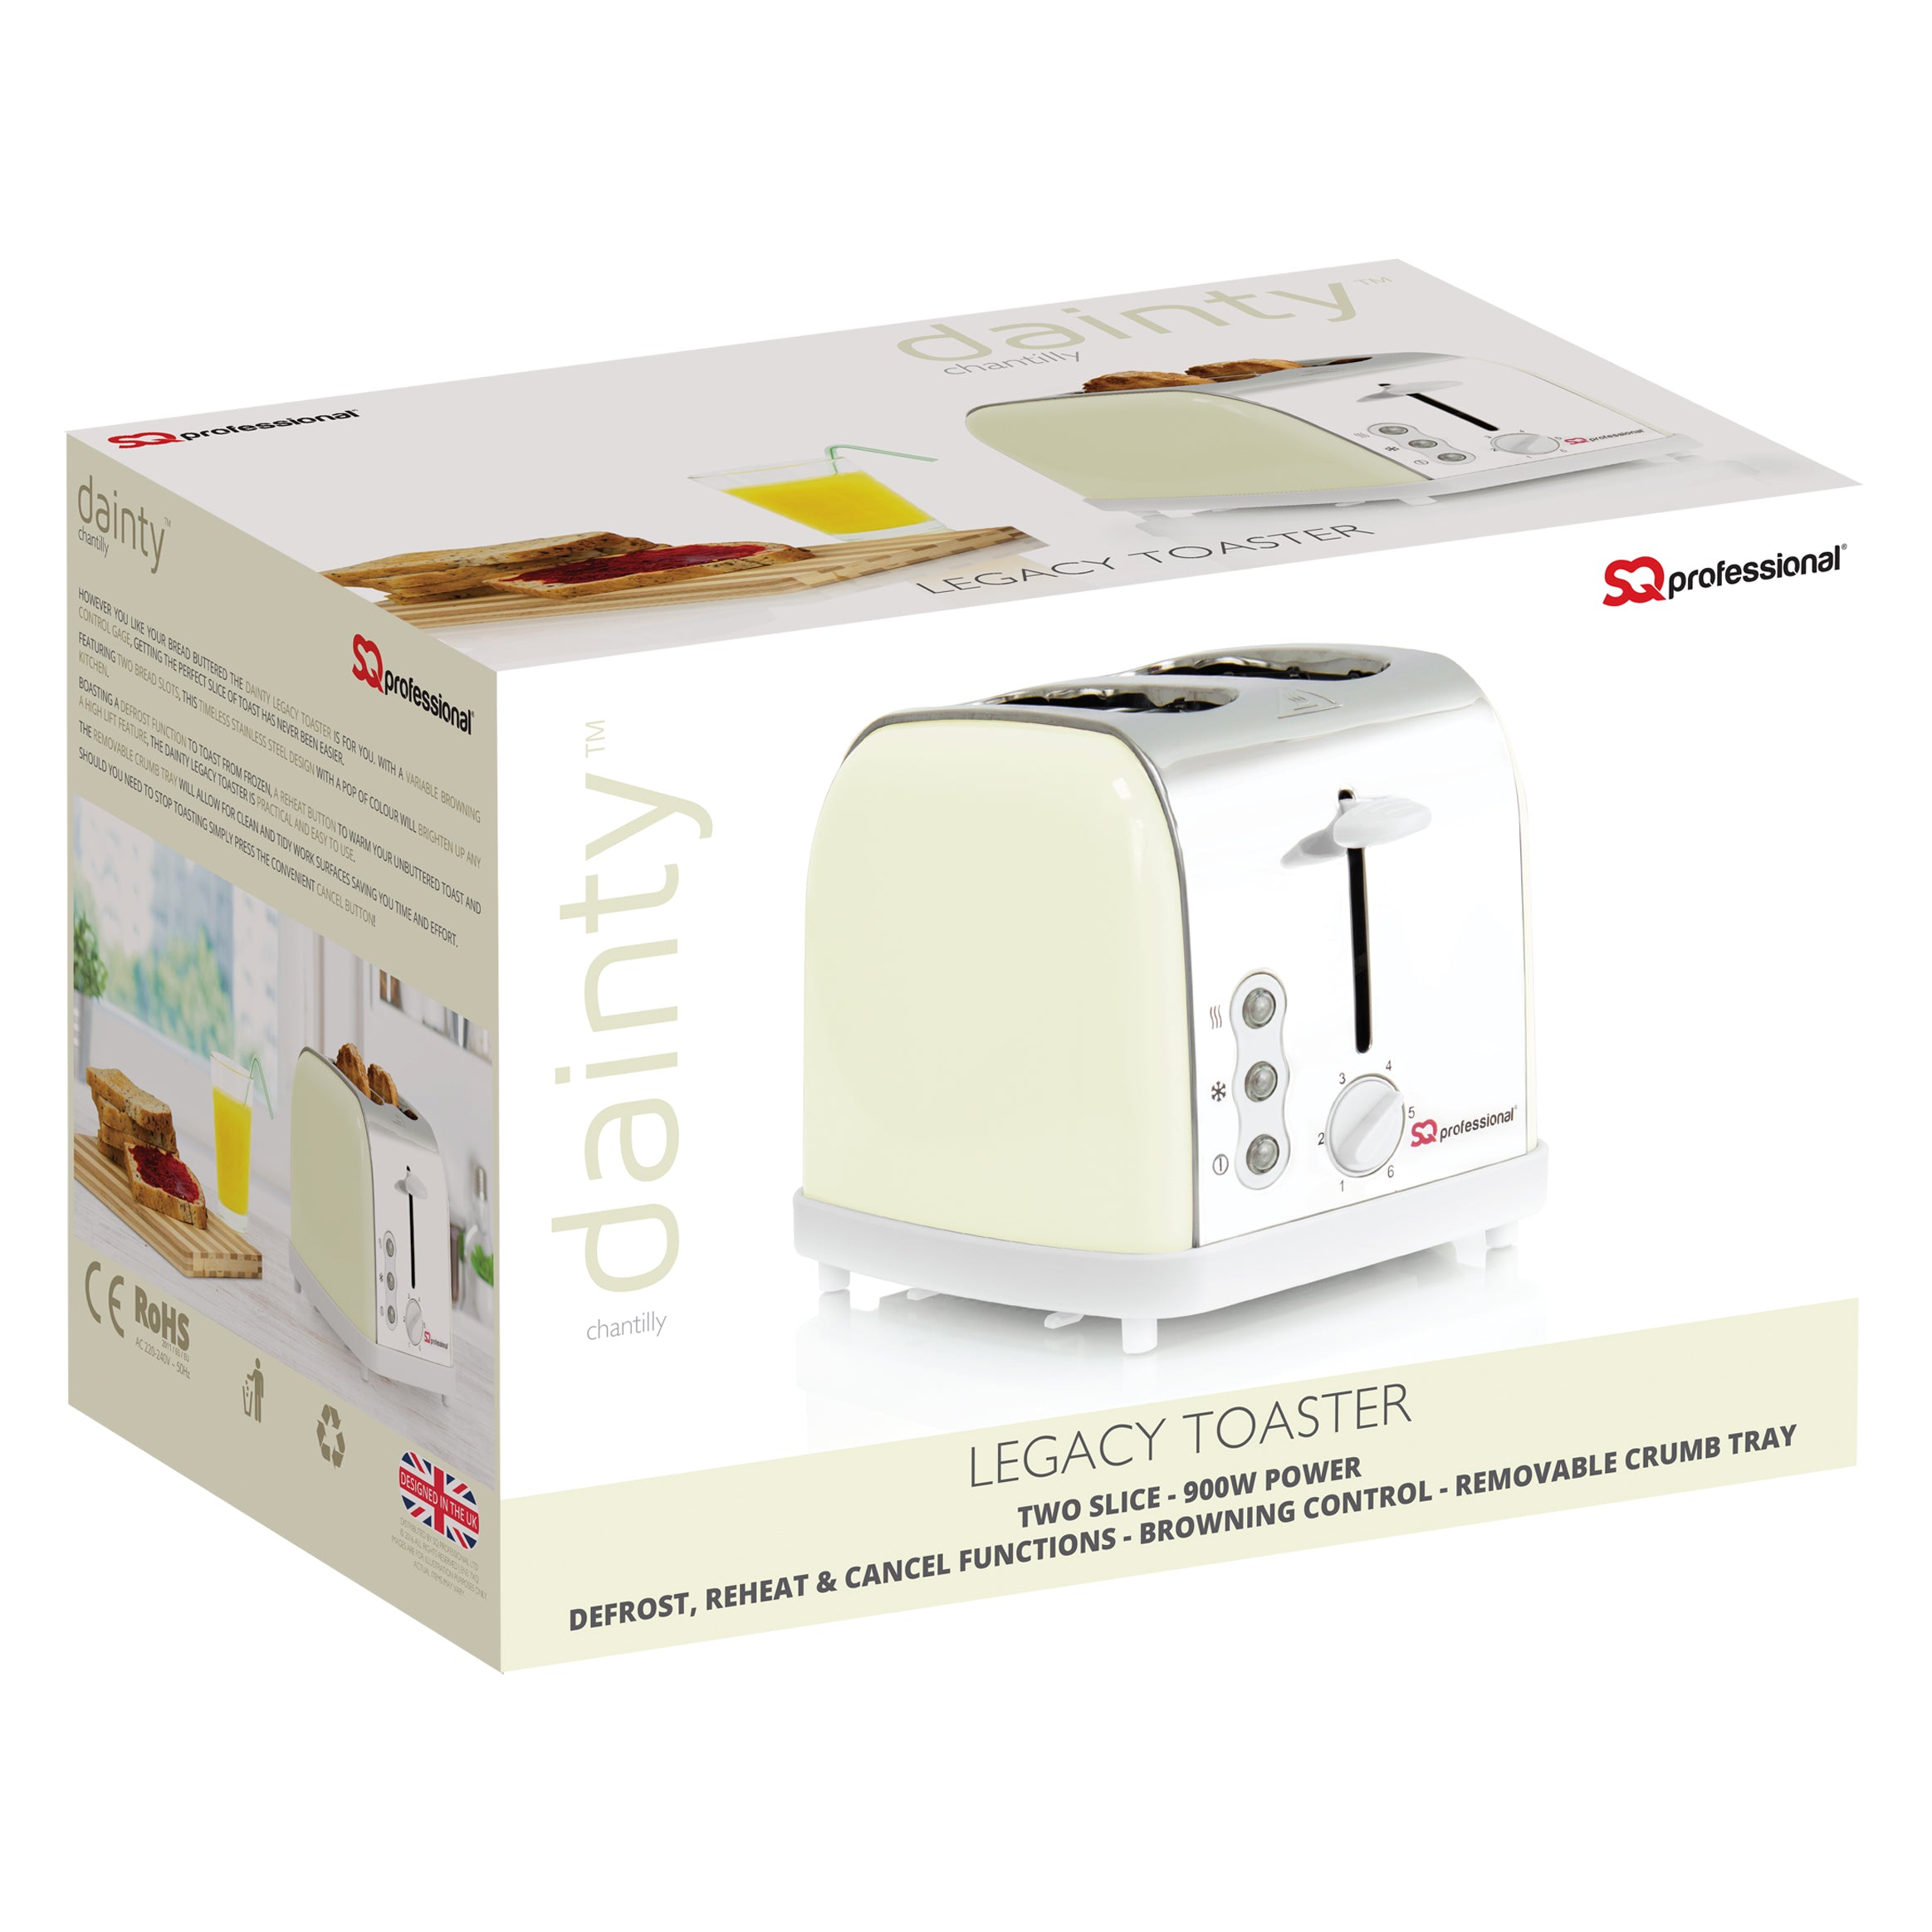 Legacy Toaster - DAINTY - Chantilly